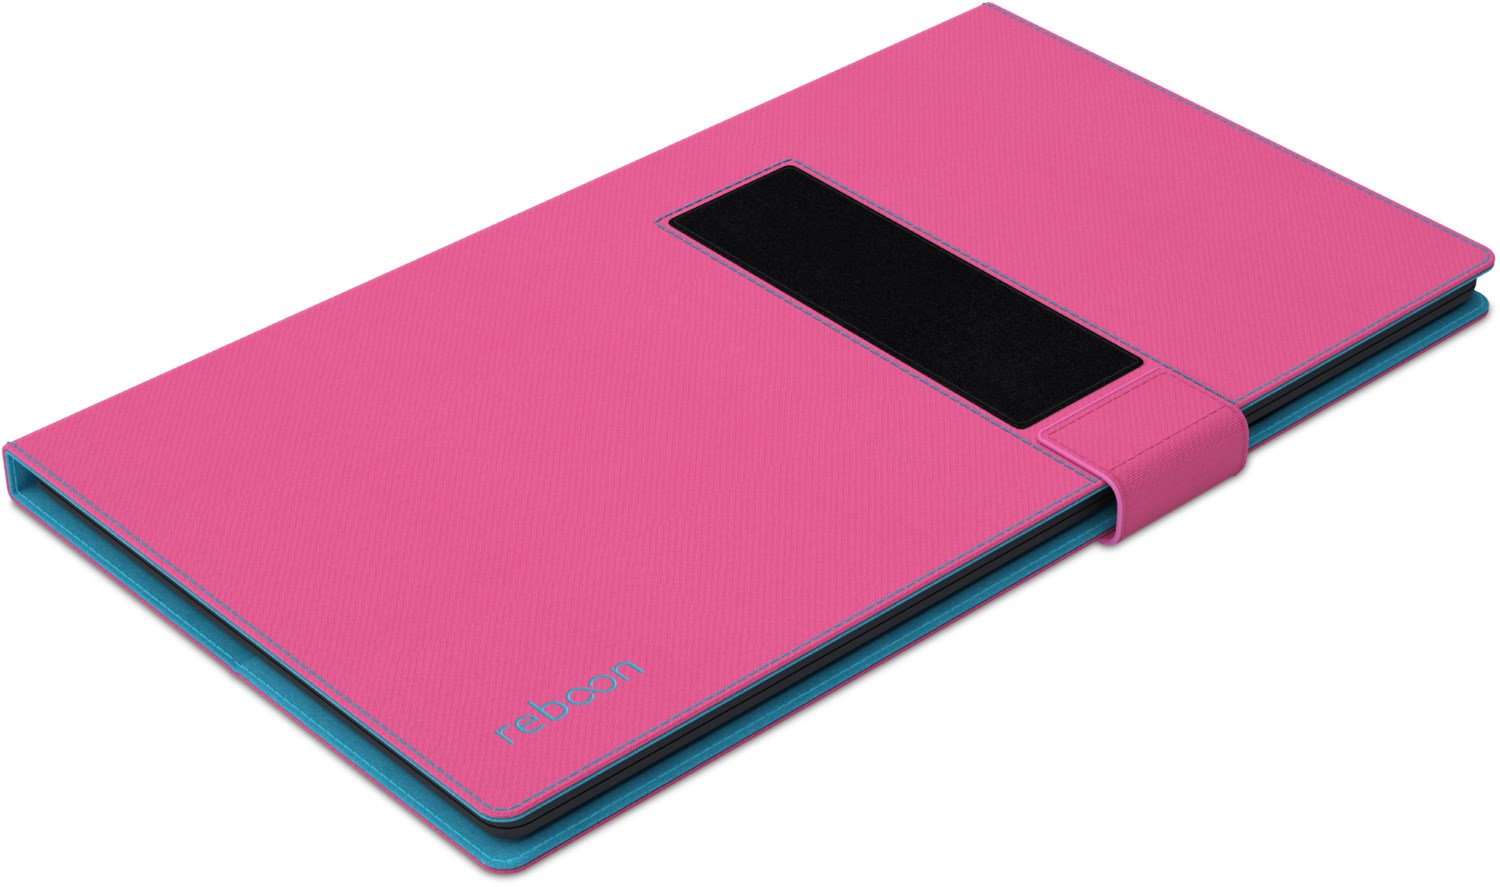 reboon booncover m2 tablethÃ¼lle pink